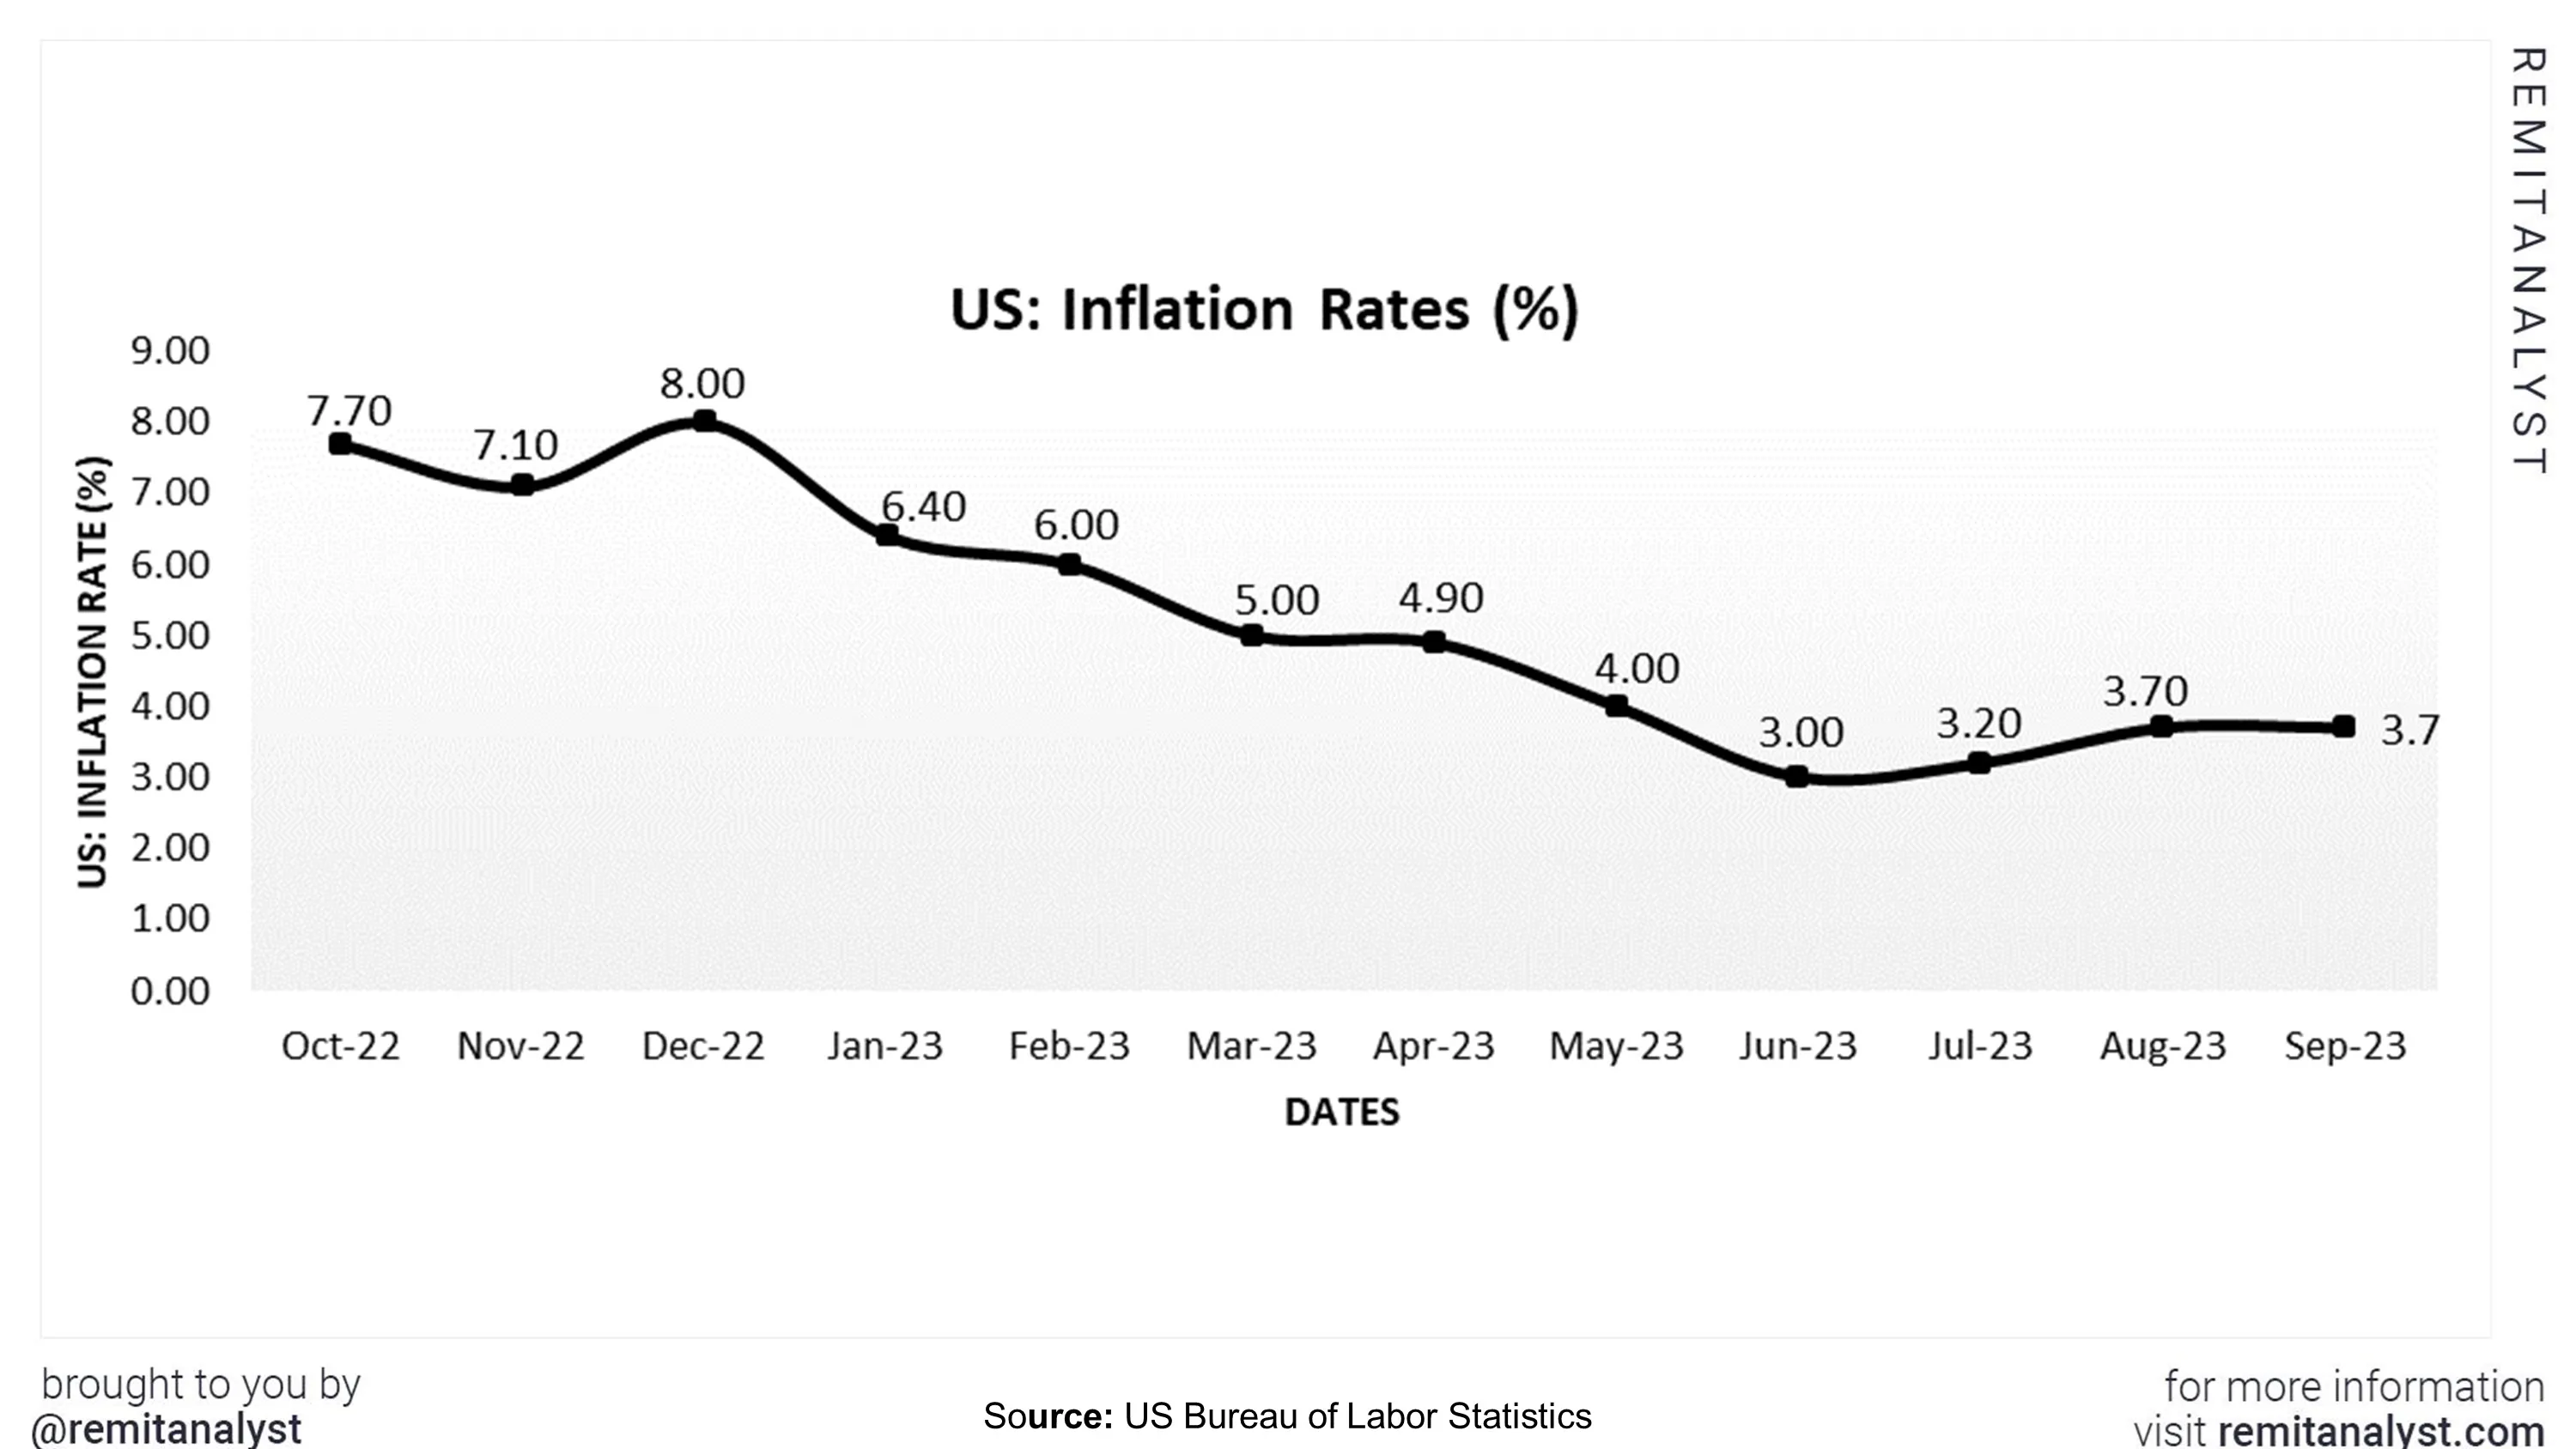 inflation-rates-in-us-from-oct-2022-to-sep-2023